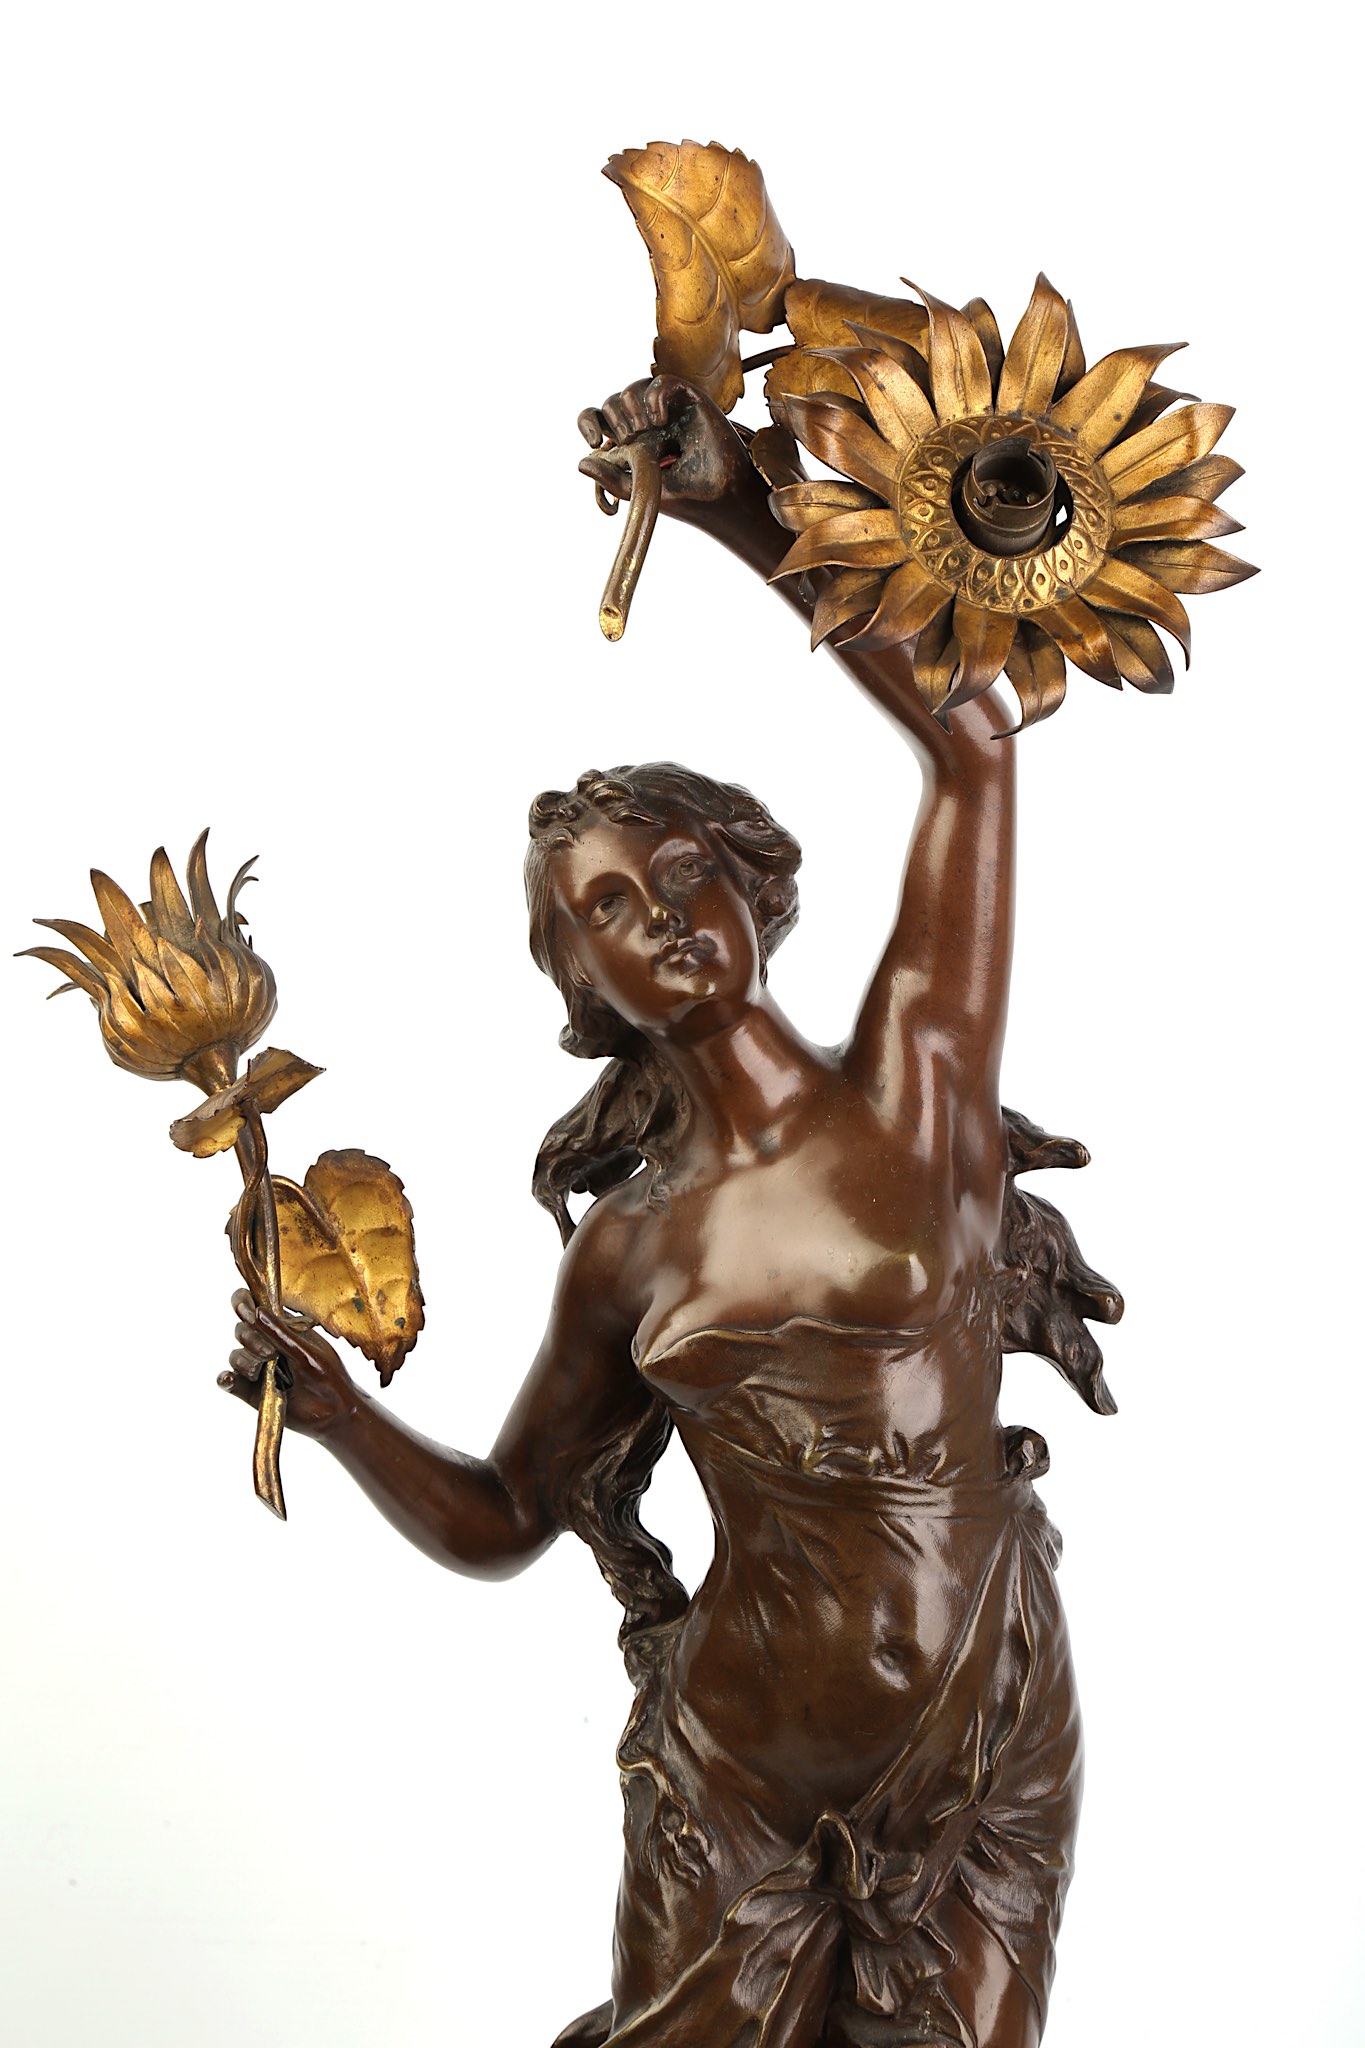 EDOUARD DROUOT (FRENCH, 1859-1945): A BRONZE FIGURE OF A SEMI-CLAD MAIDEN FITTED AS A LAMP BASE - Image 5 of 11